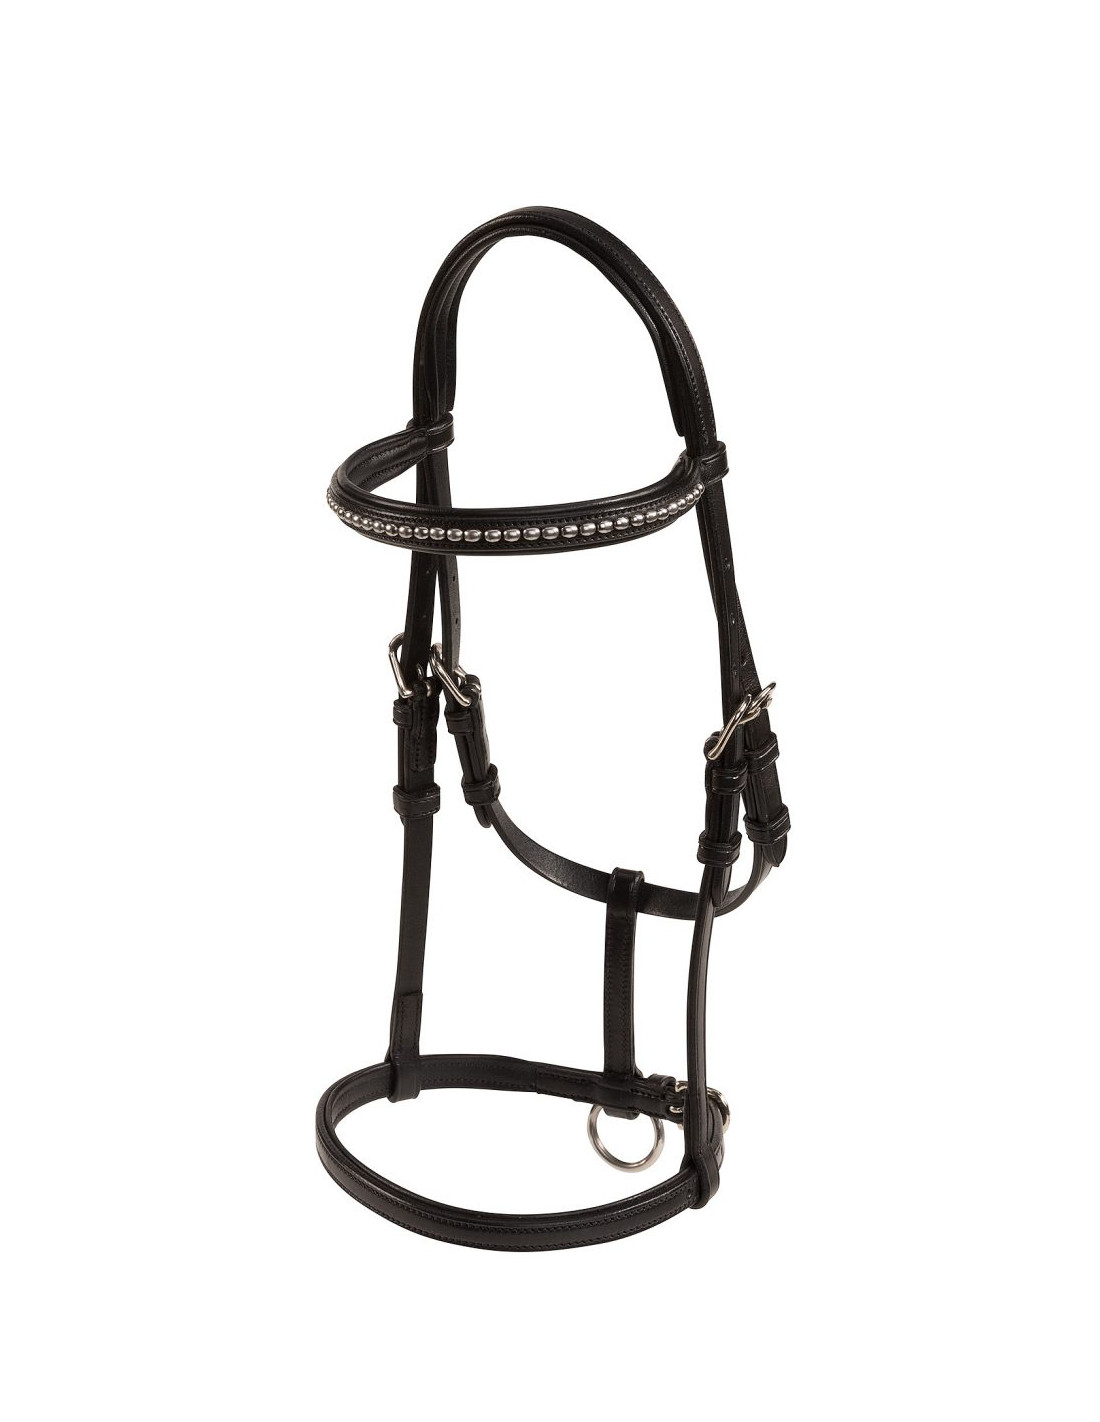 SOFT LEATHER. FOAL SIZE LEATHER HEADCOLLAR BLACK BRAND NEW 